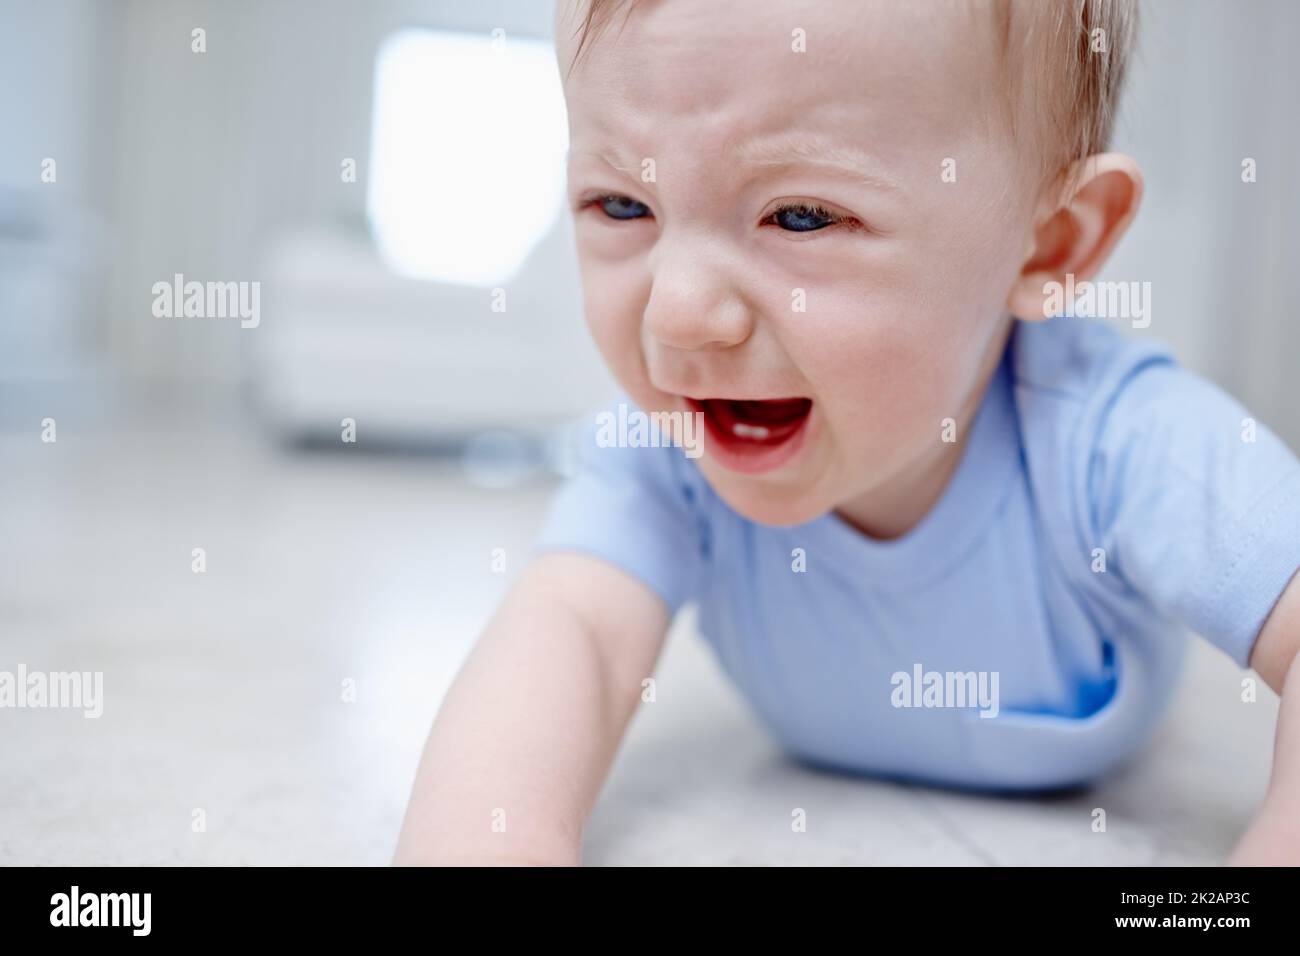 Teething is not fun. Closeup of a very unhappy baby boy lying on the floor. Stock Photo